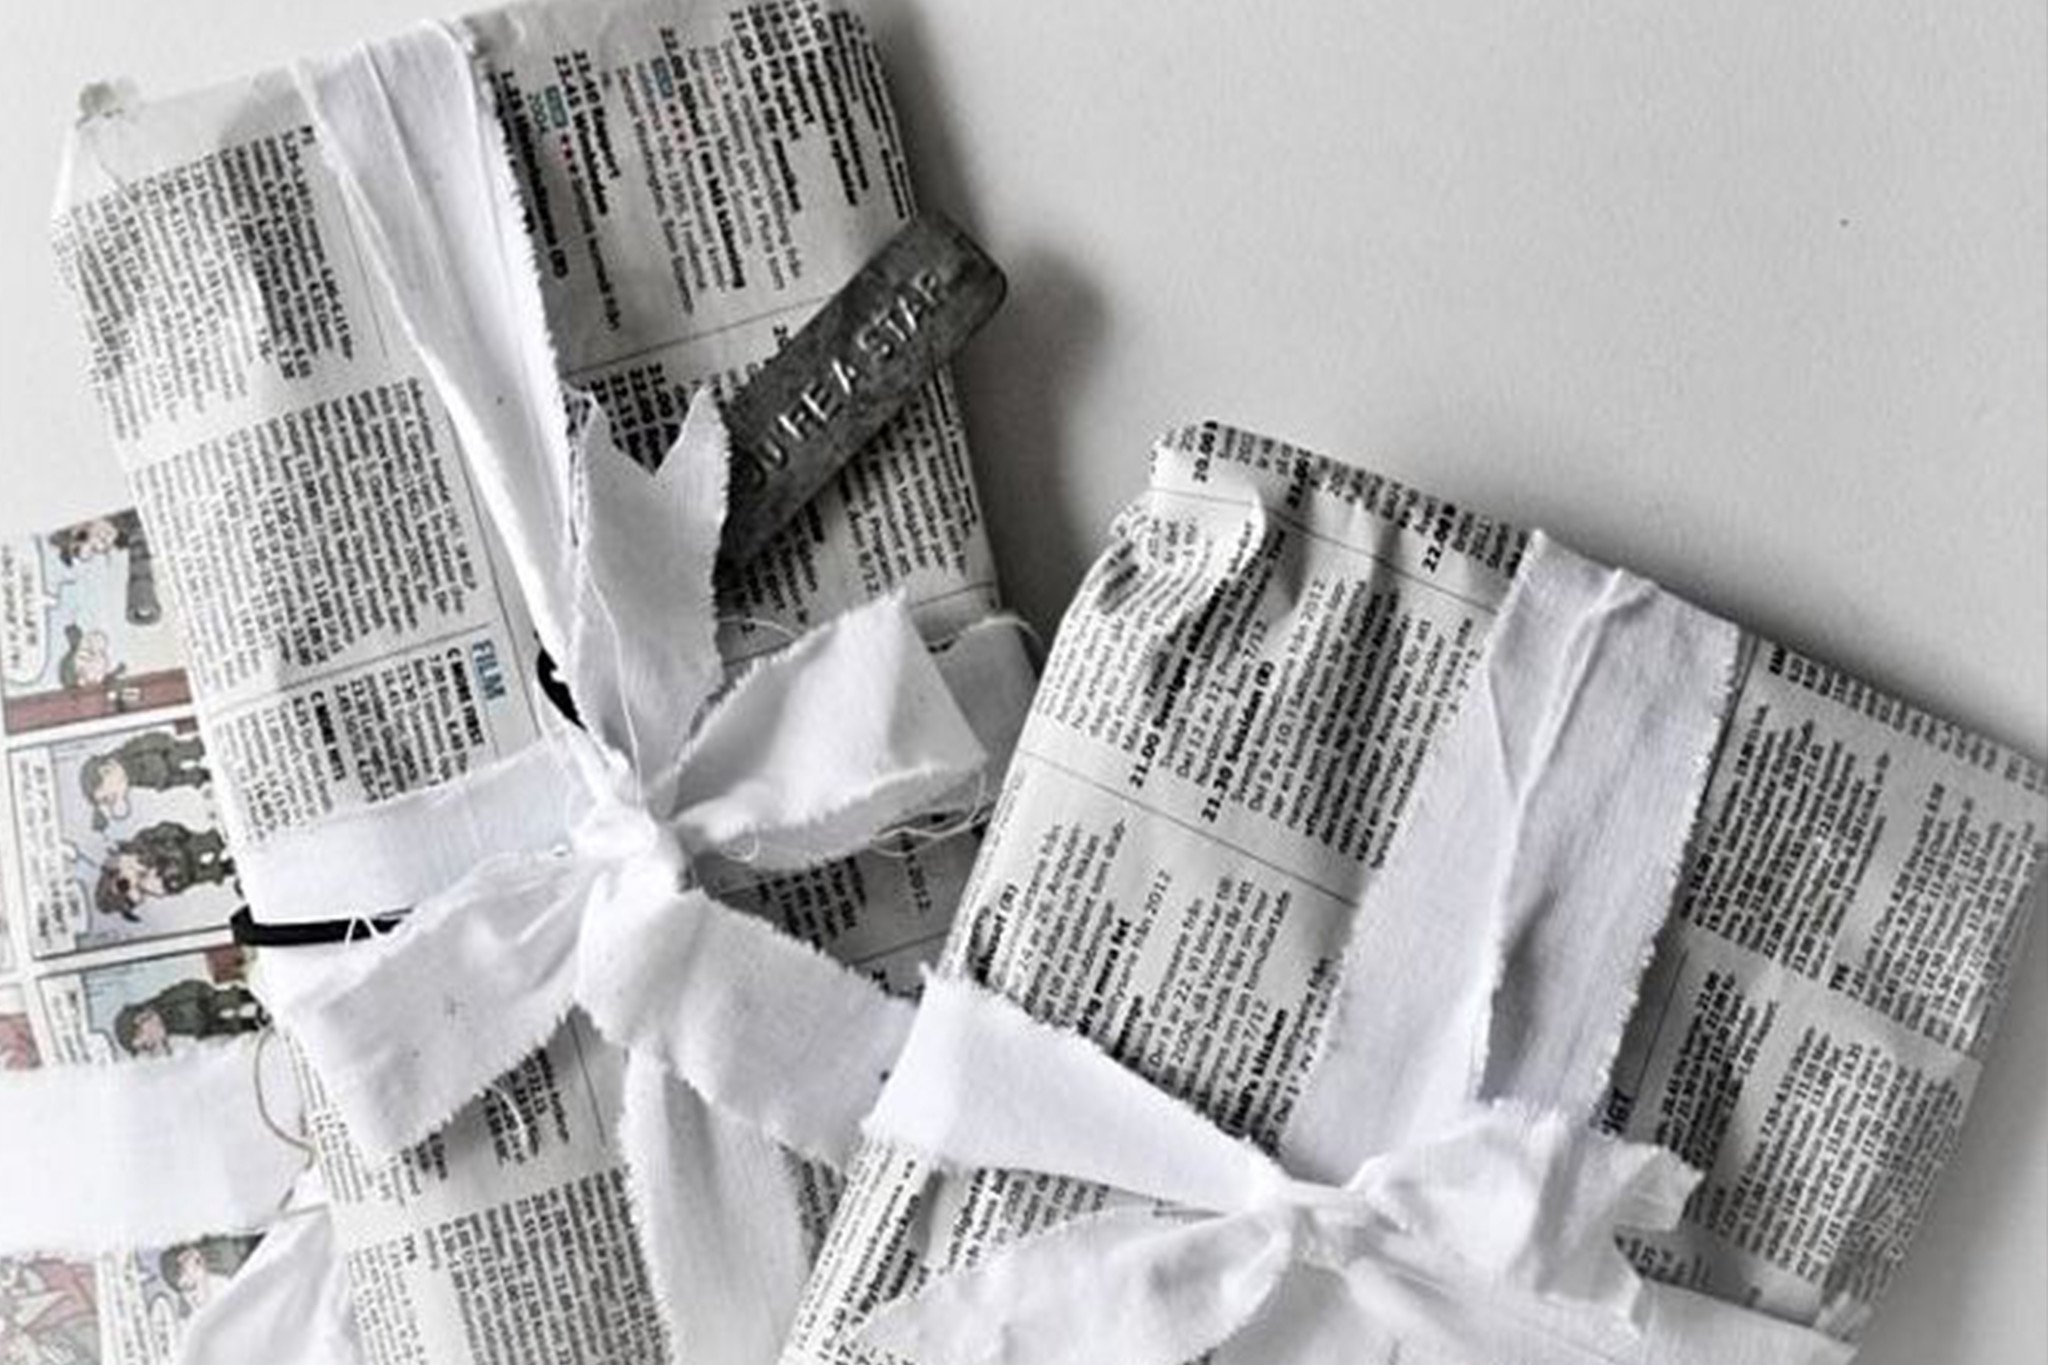 22 Creative Uses for Old Magazines